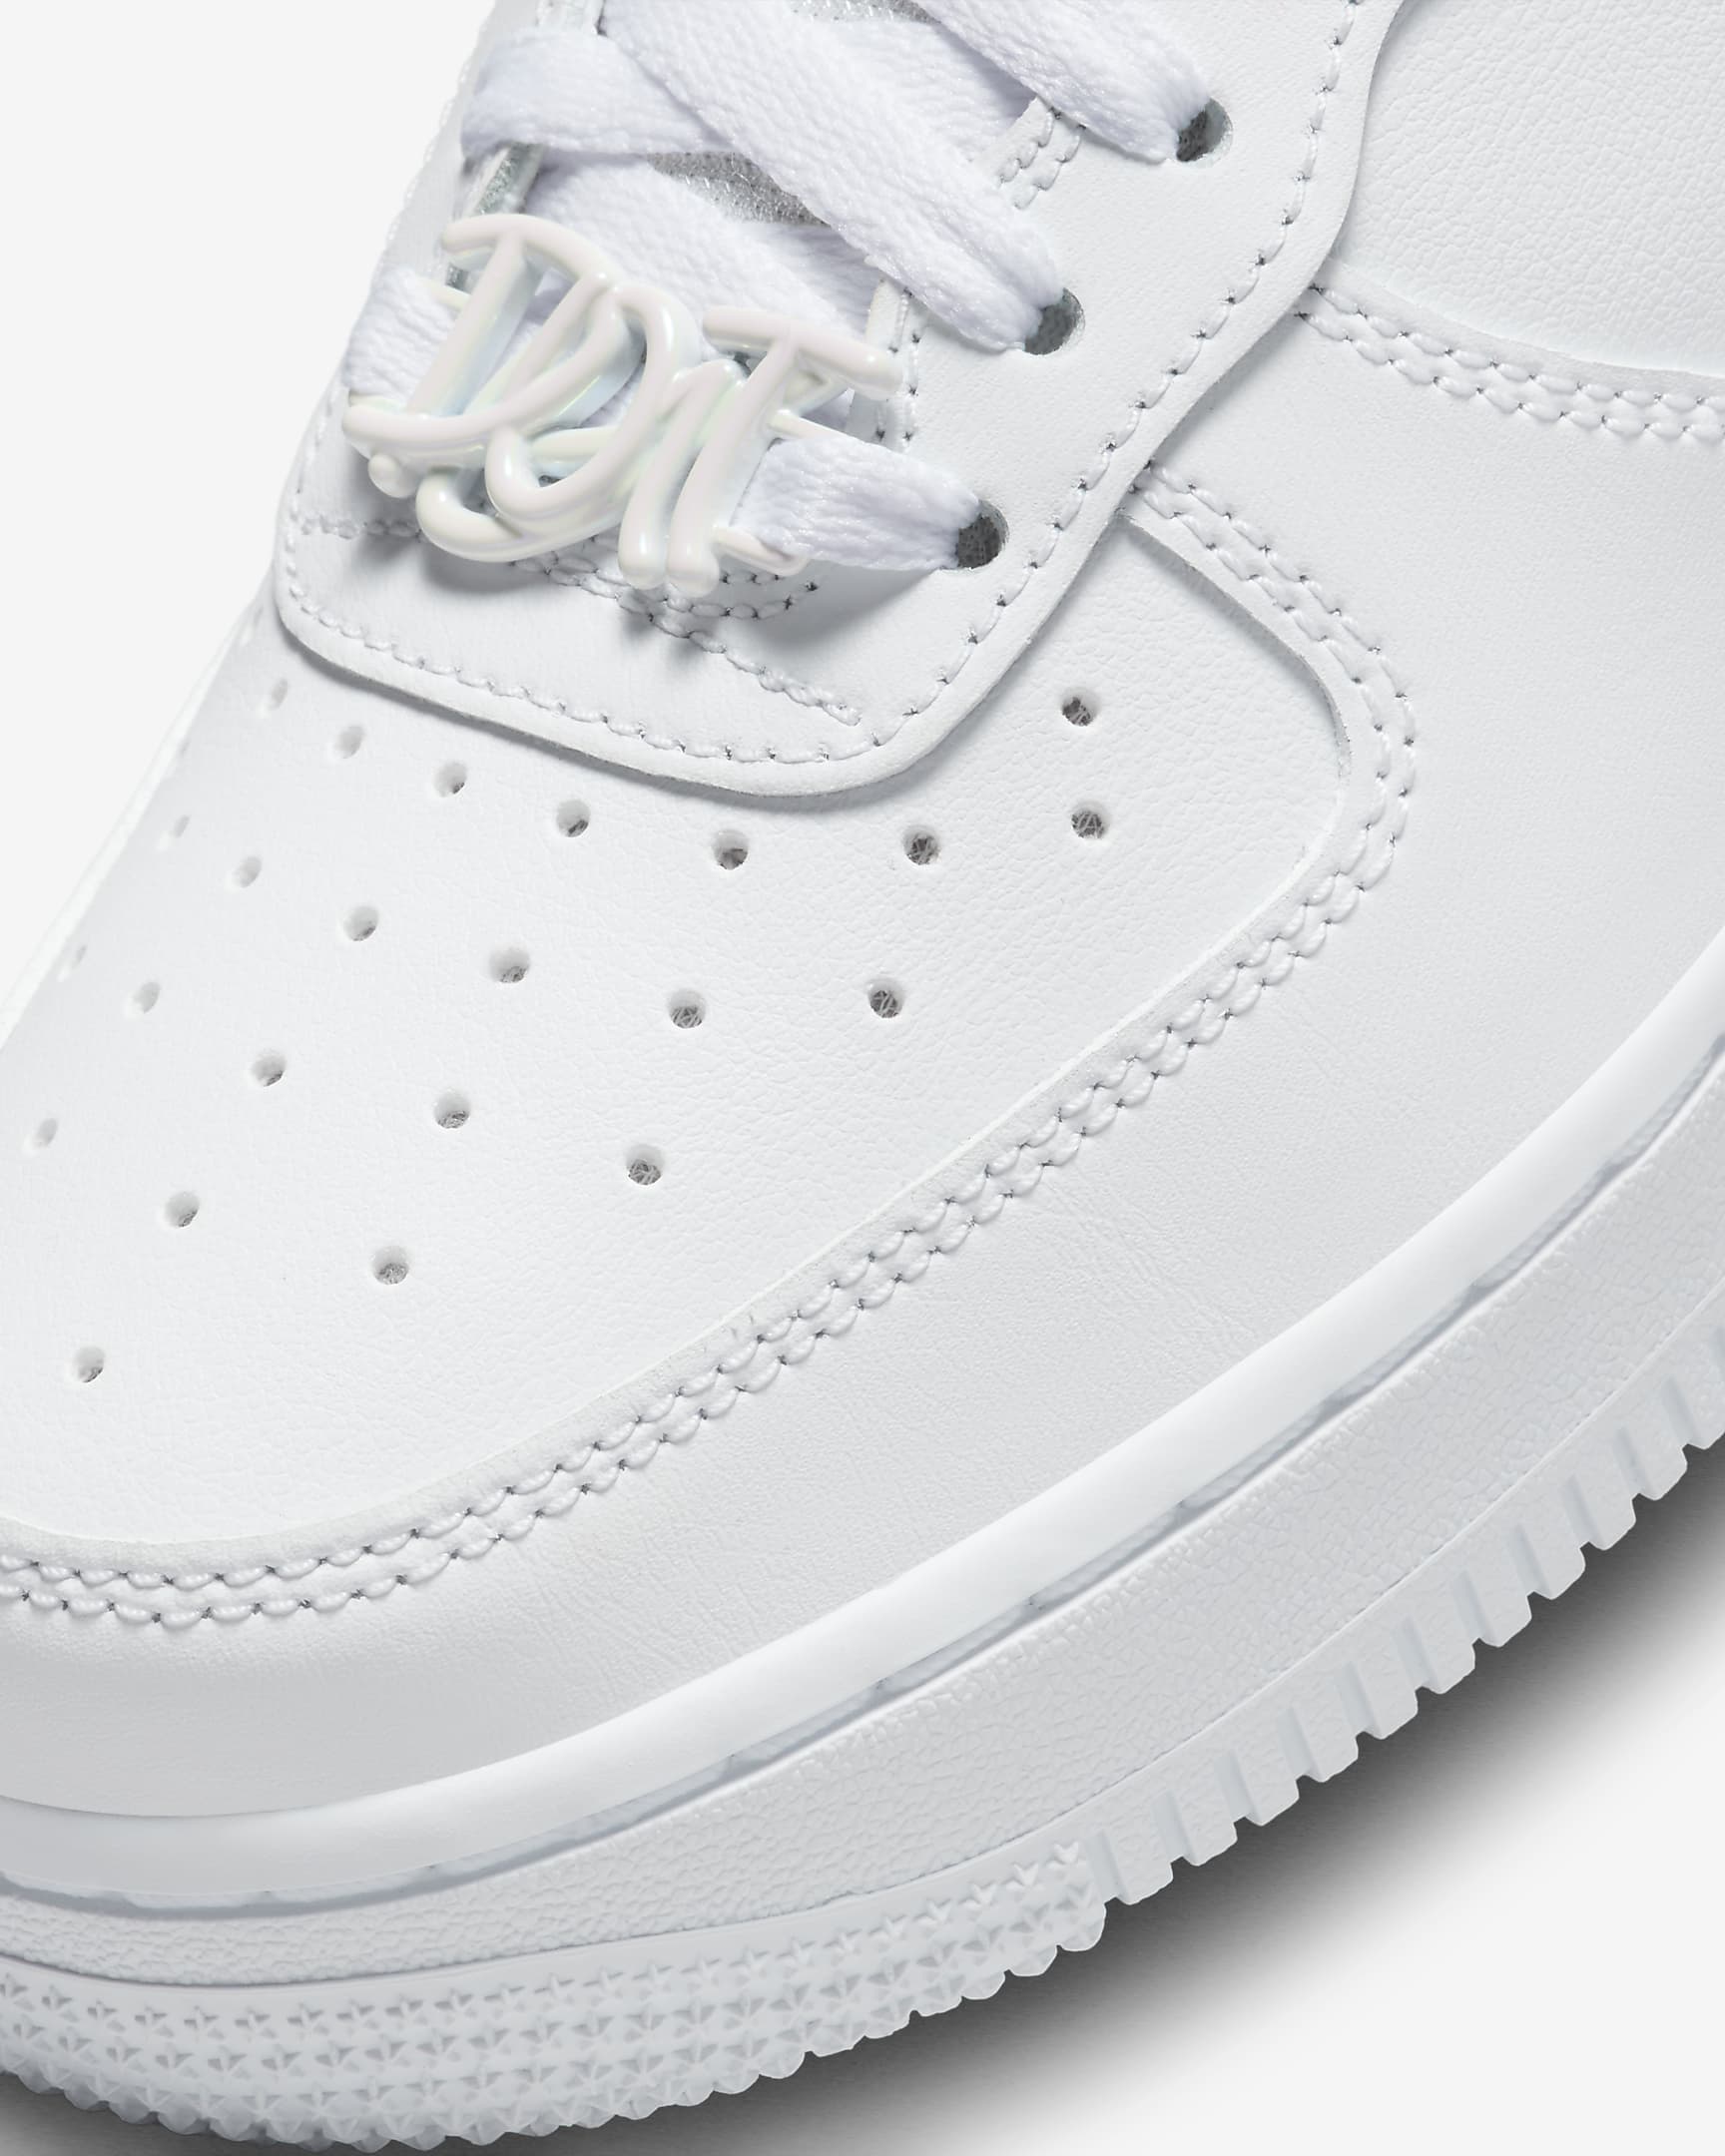 Step Up Your Style with Nike Air Force 1 '07 Women's Shoe Review: The ...